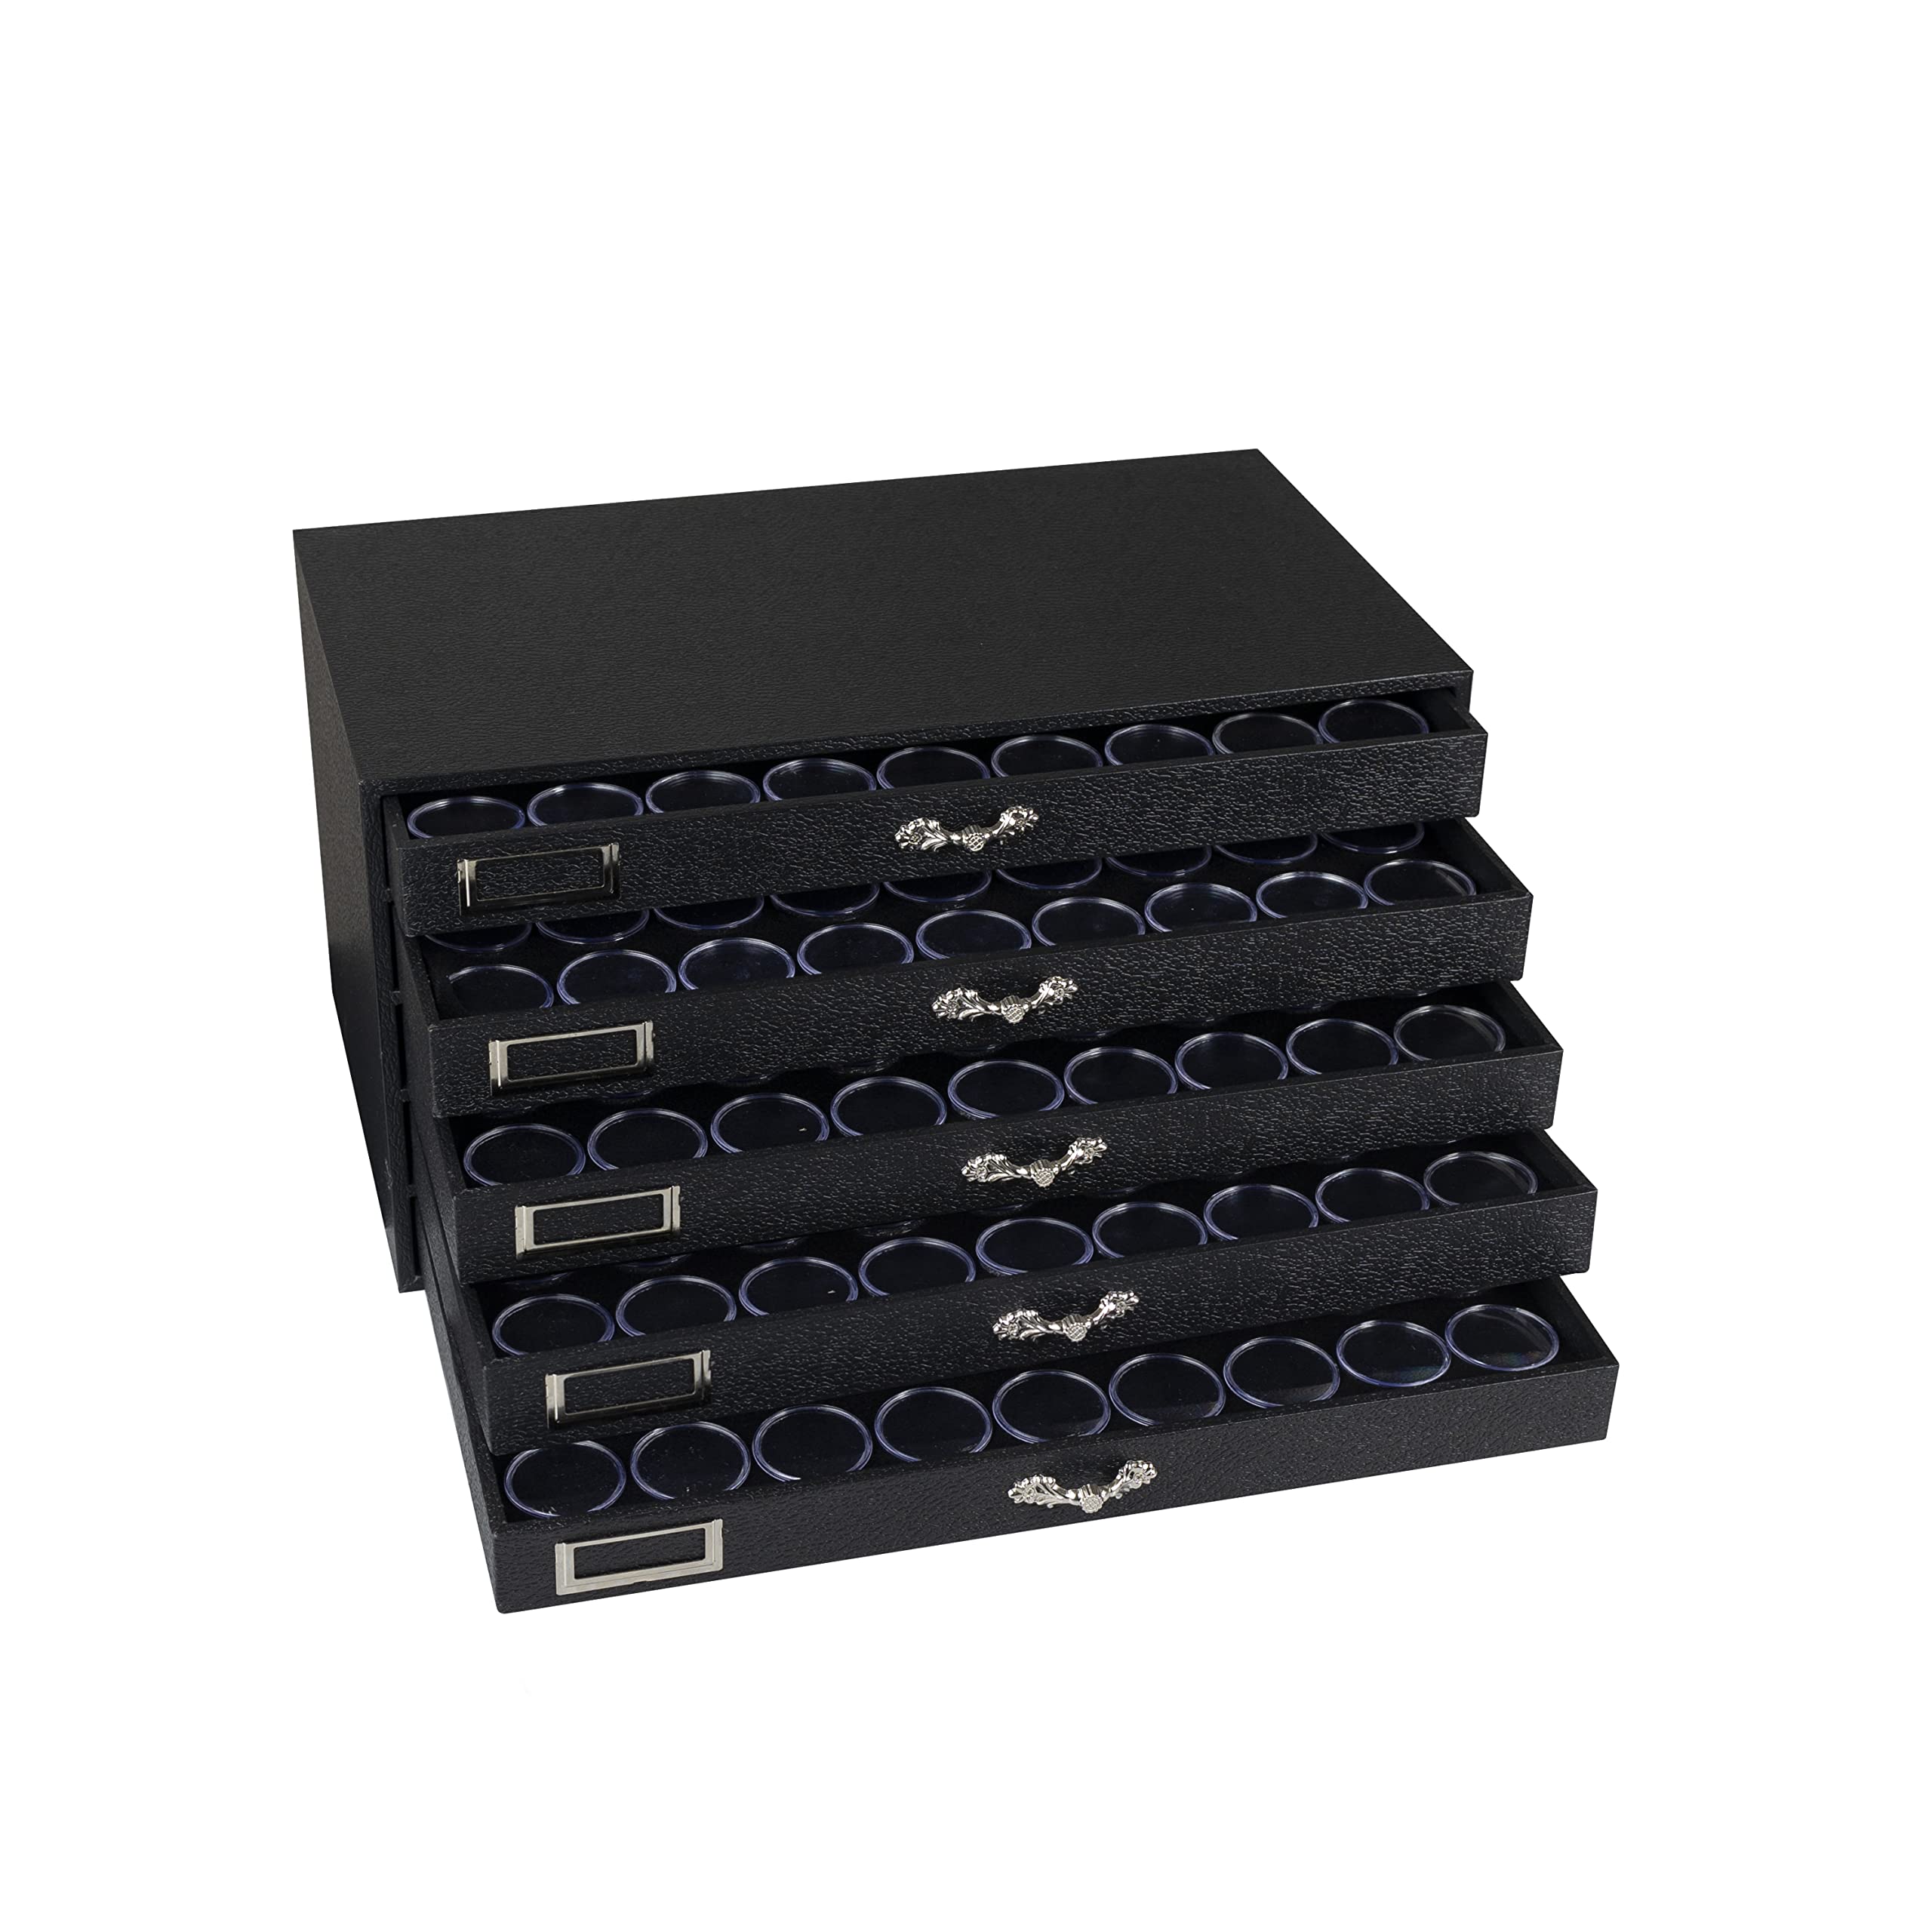 Novel Box 5-Drawer Jewelry Tray Organizer With Black Leatherette Finish & 36-Count Gemstone/Coin Tray Foam Liners (Black, 180 Jars)